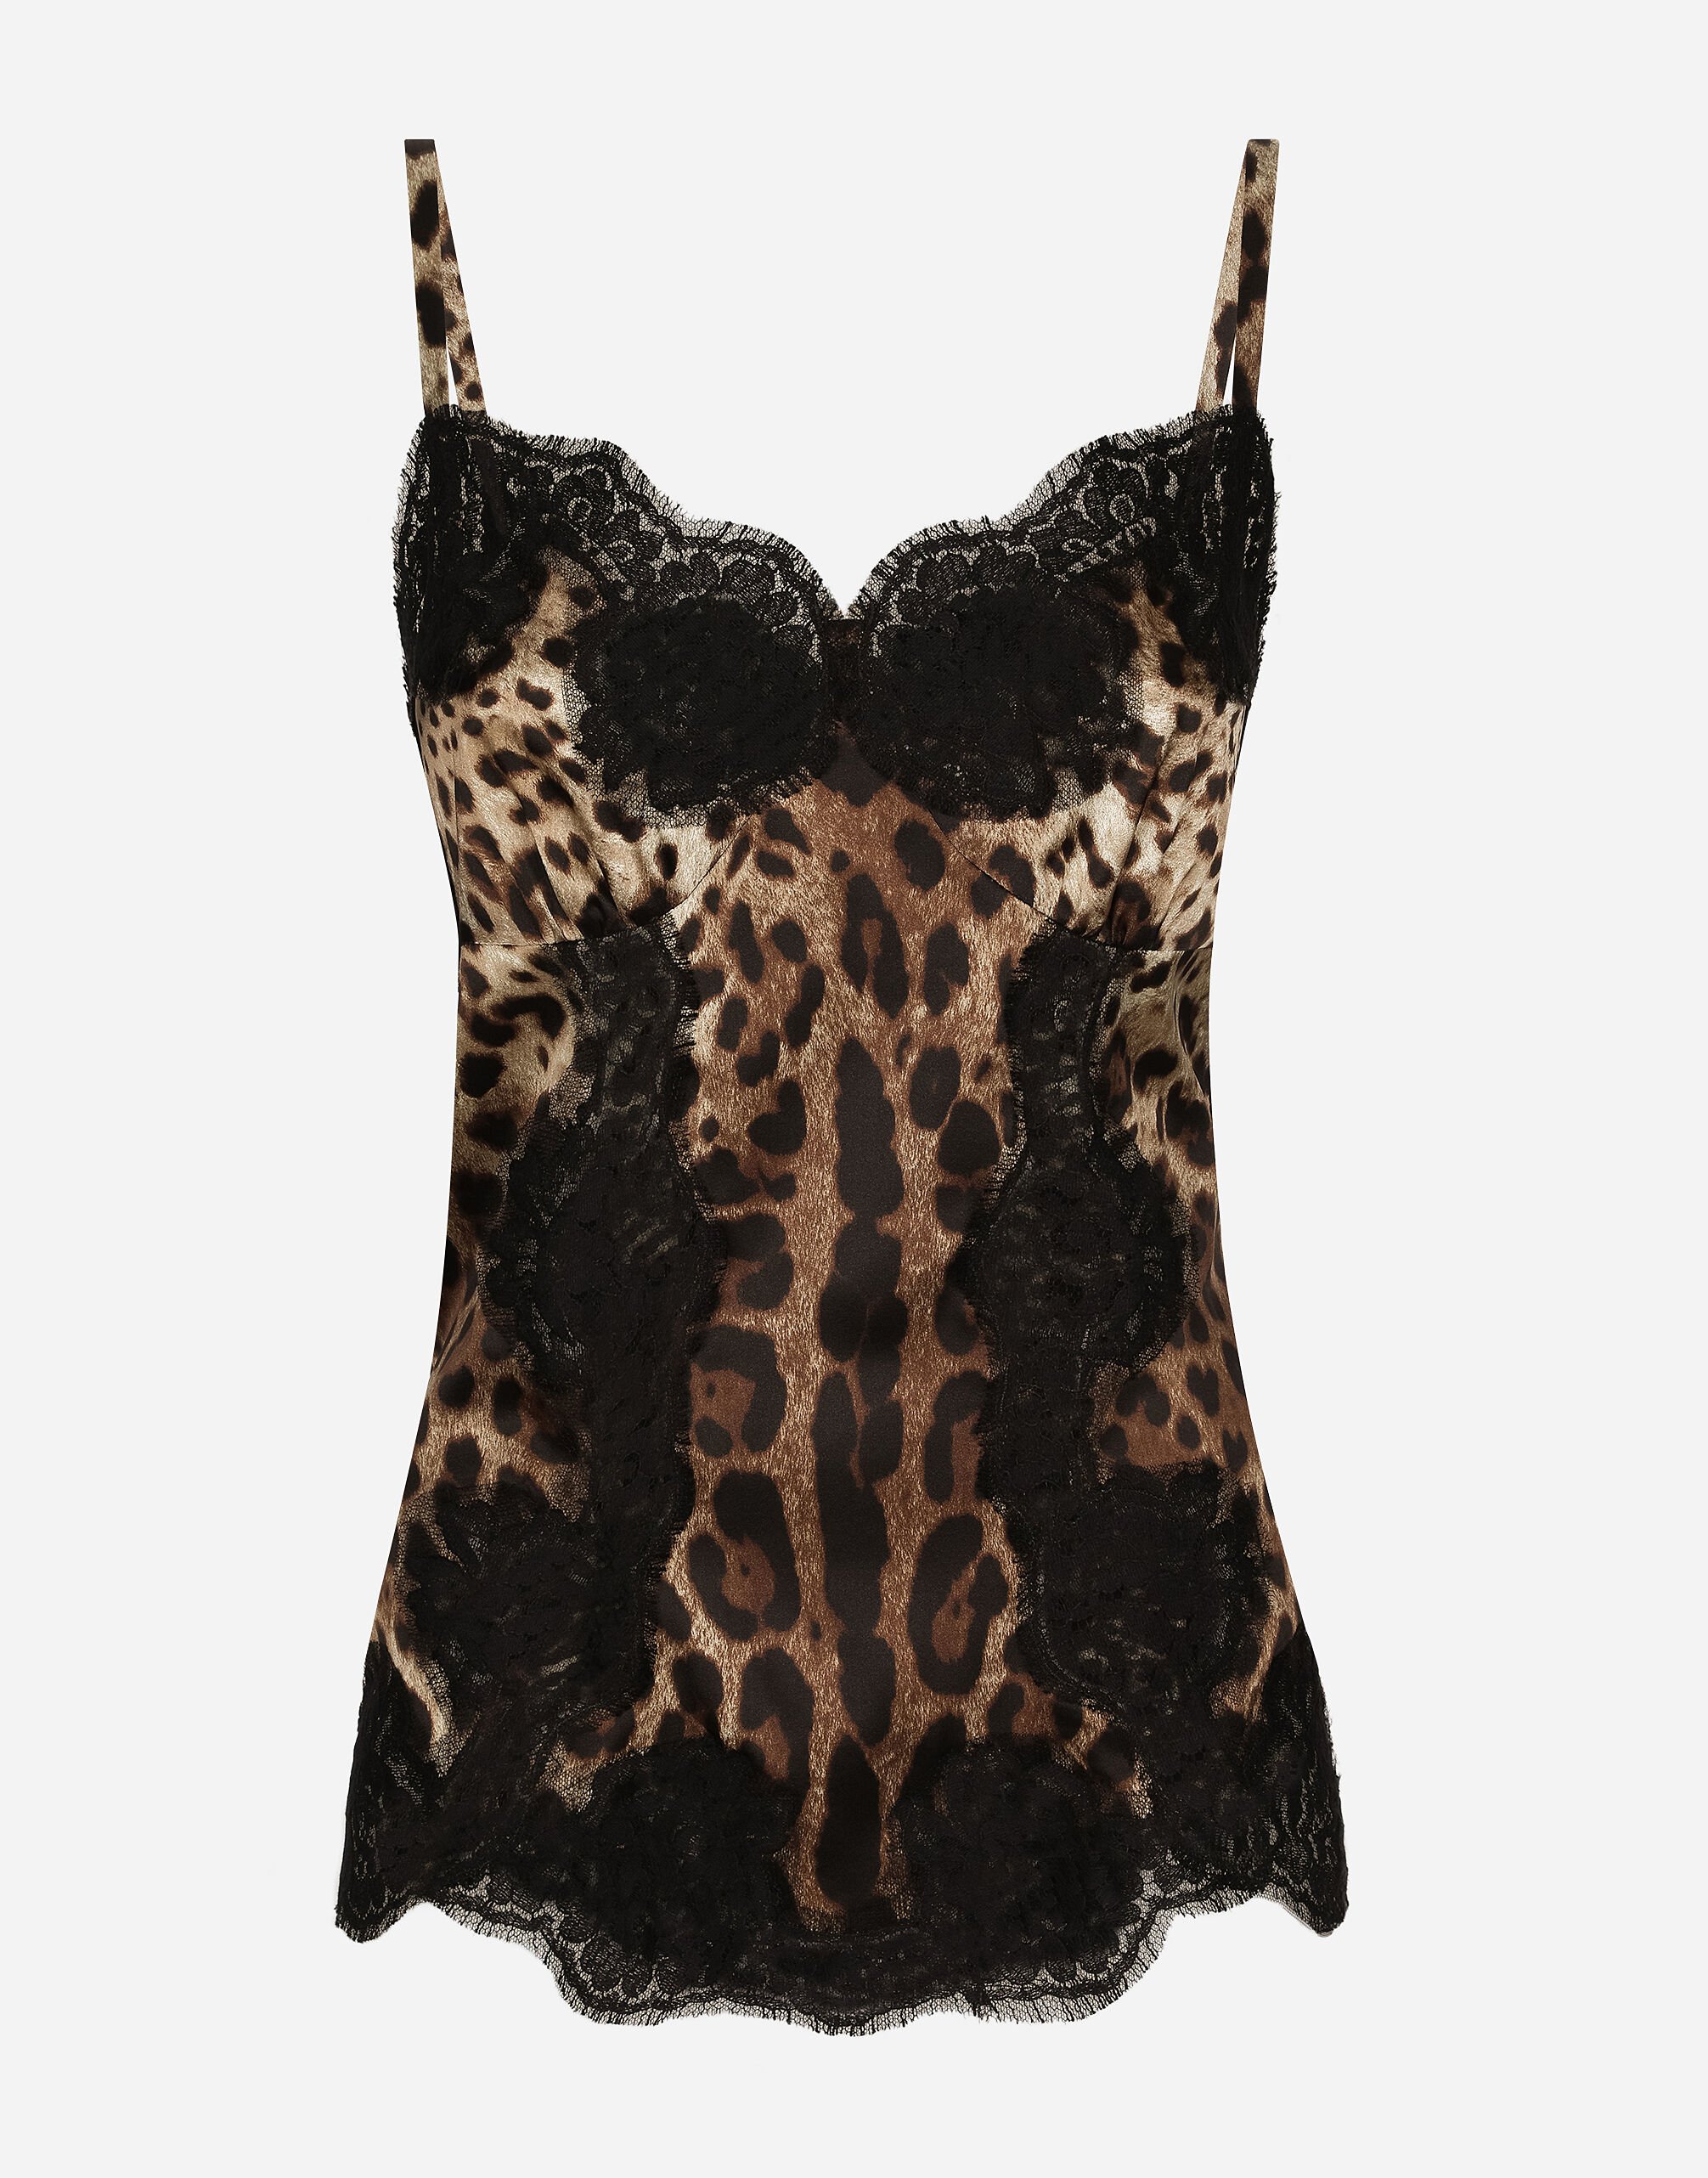 Dolce&Gabbana Leopard-print satin top with lace inlay Red F79BUTFURHM